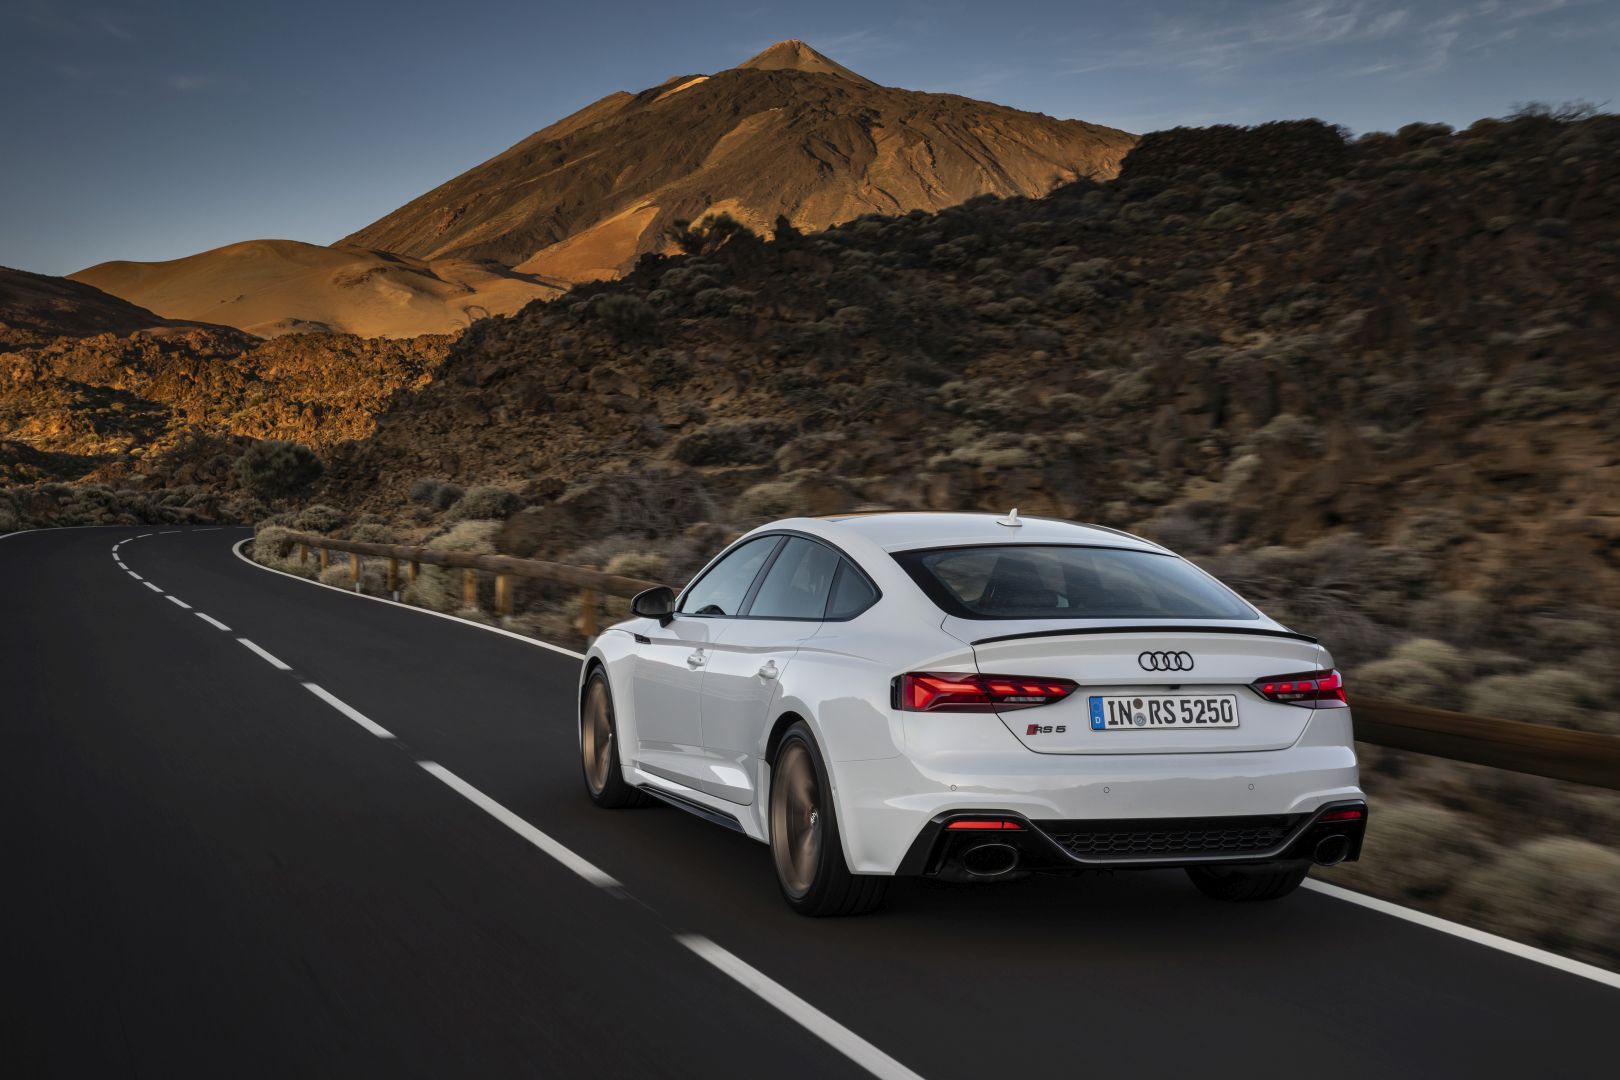 See the 2021 Audi RS5 Sportback in Full Glory, Details Are Sonoma